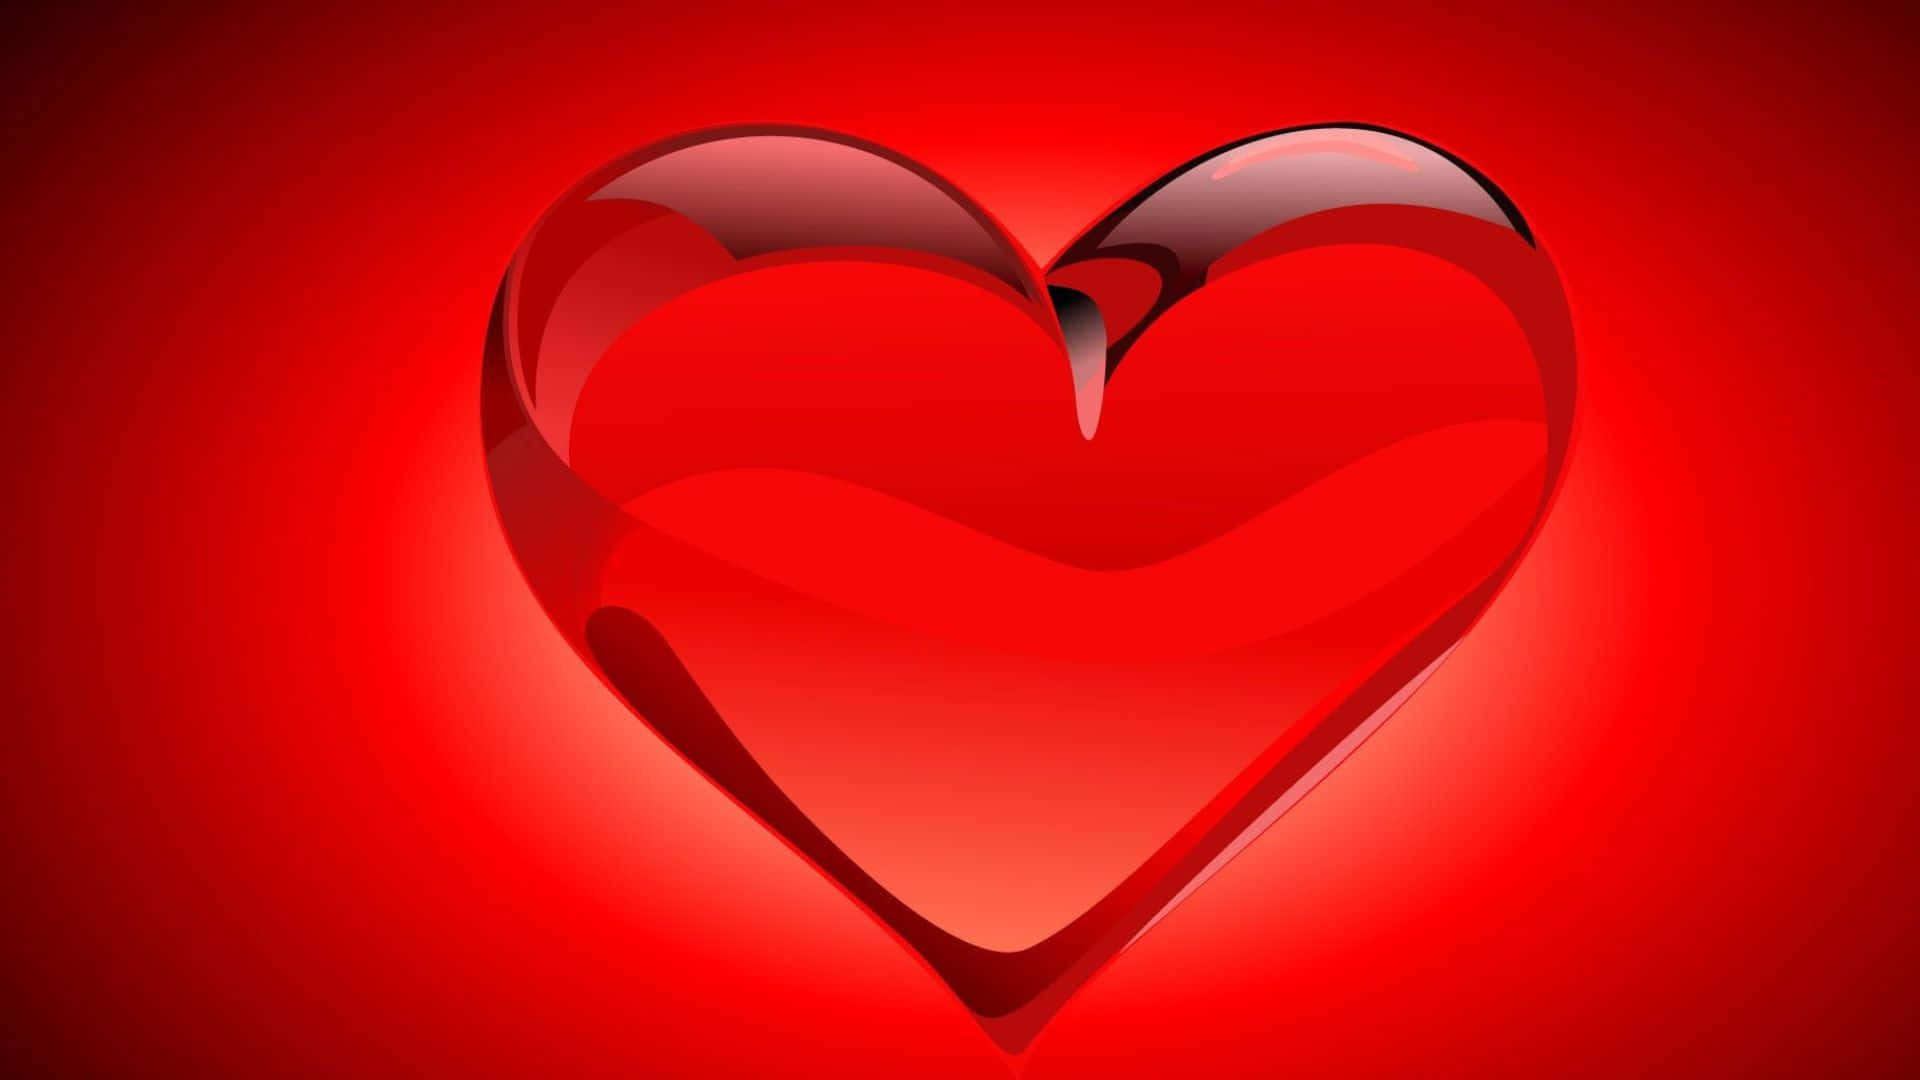 a red heart shaped object on a red background